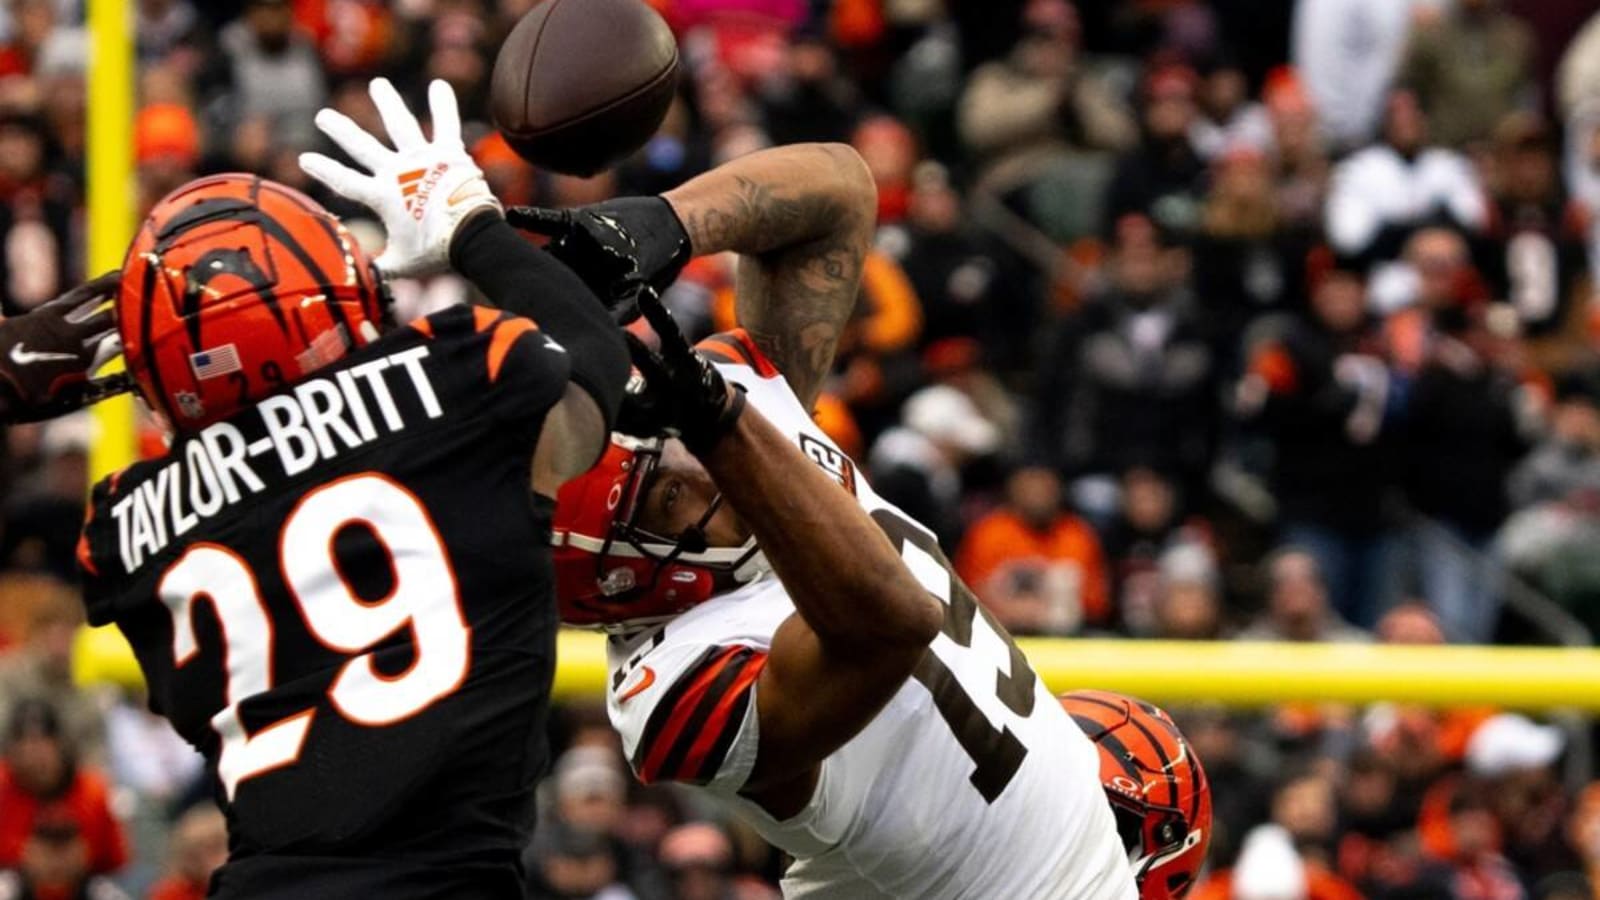 Kevin Stefanski provides injury update after scary play right before Browns begin playoffs